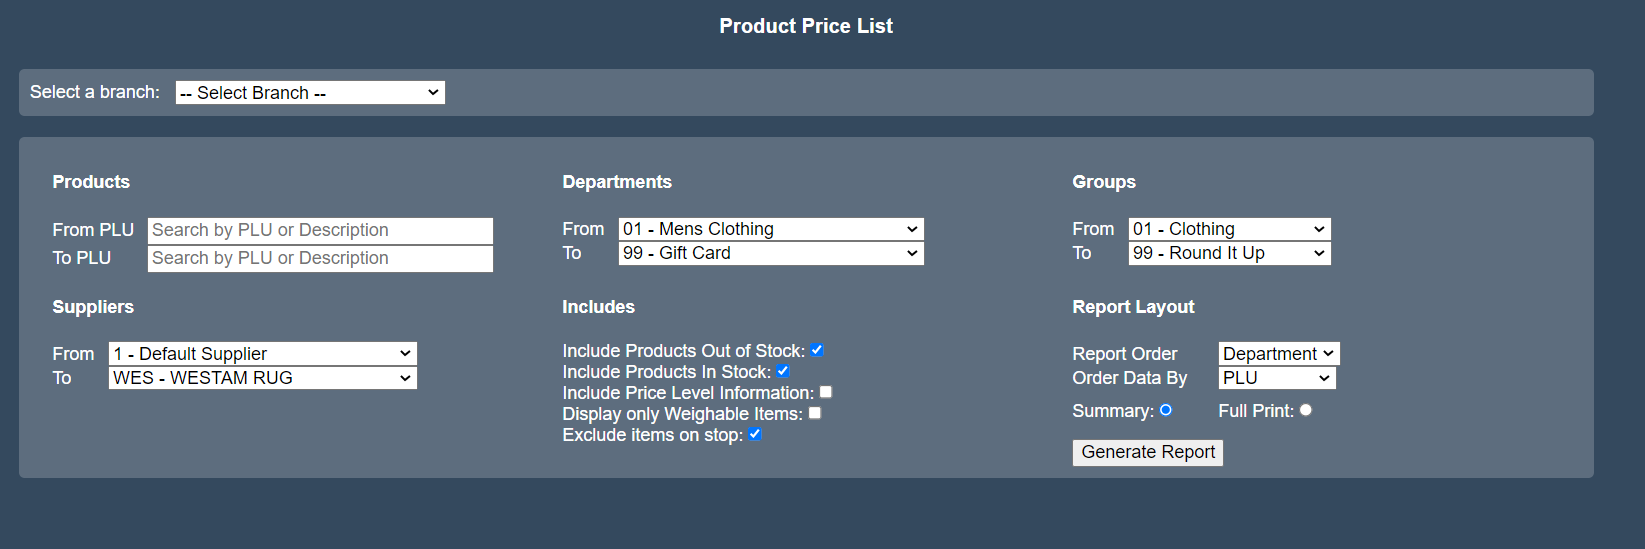 product_price_list.png